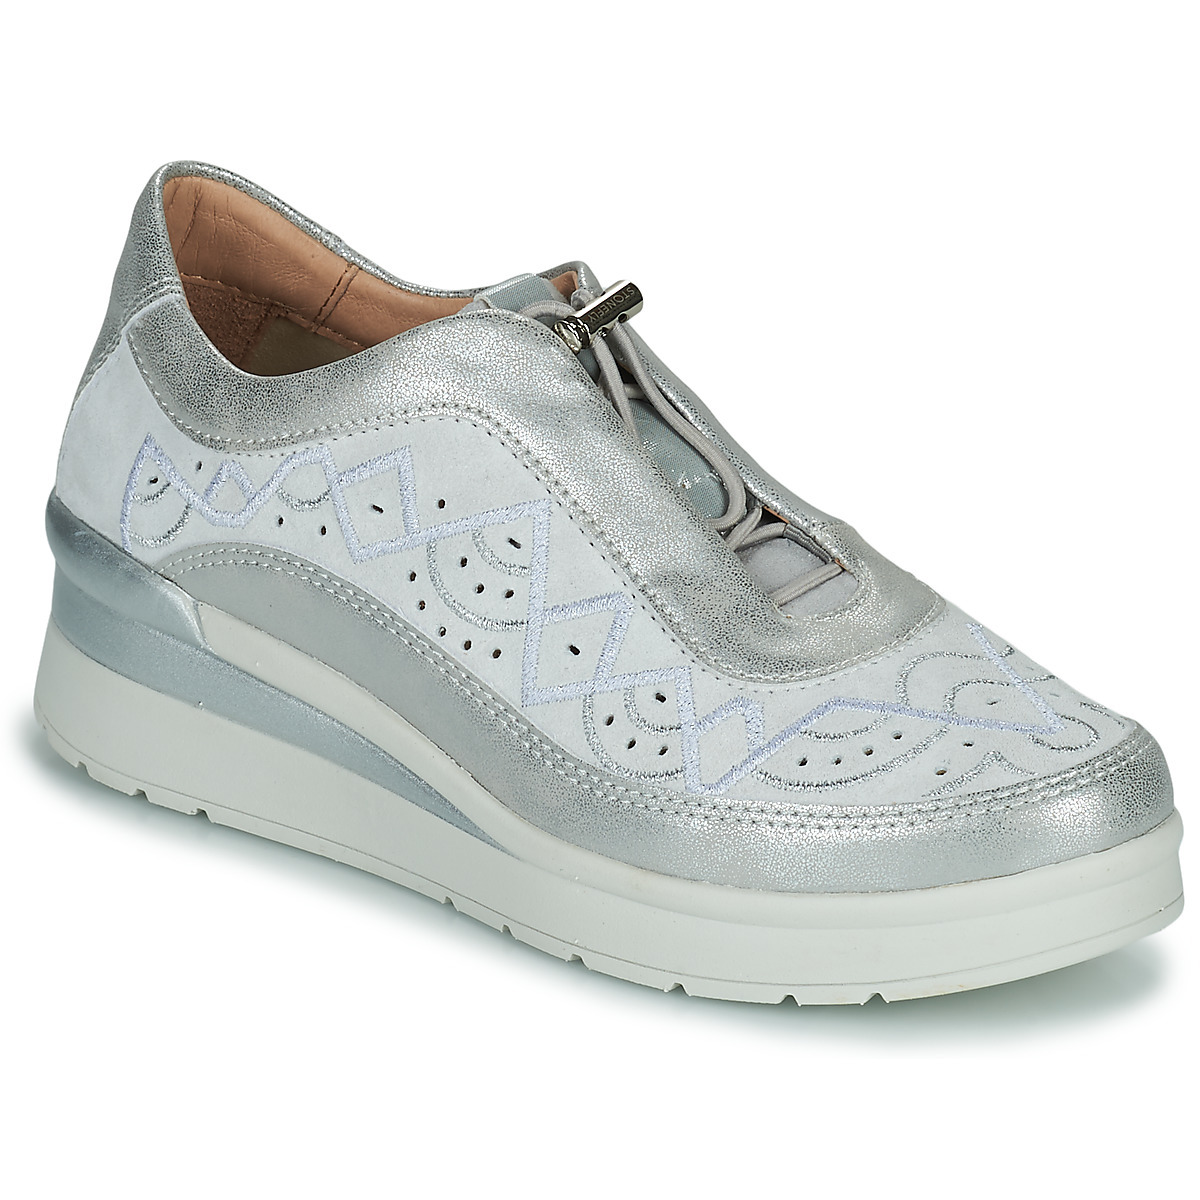 Lady Sneakers - Silver - Stonefly - Spartoo GOOFASH